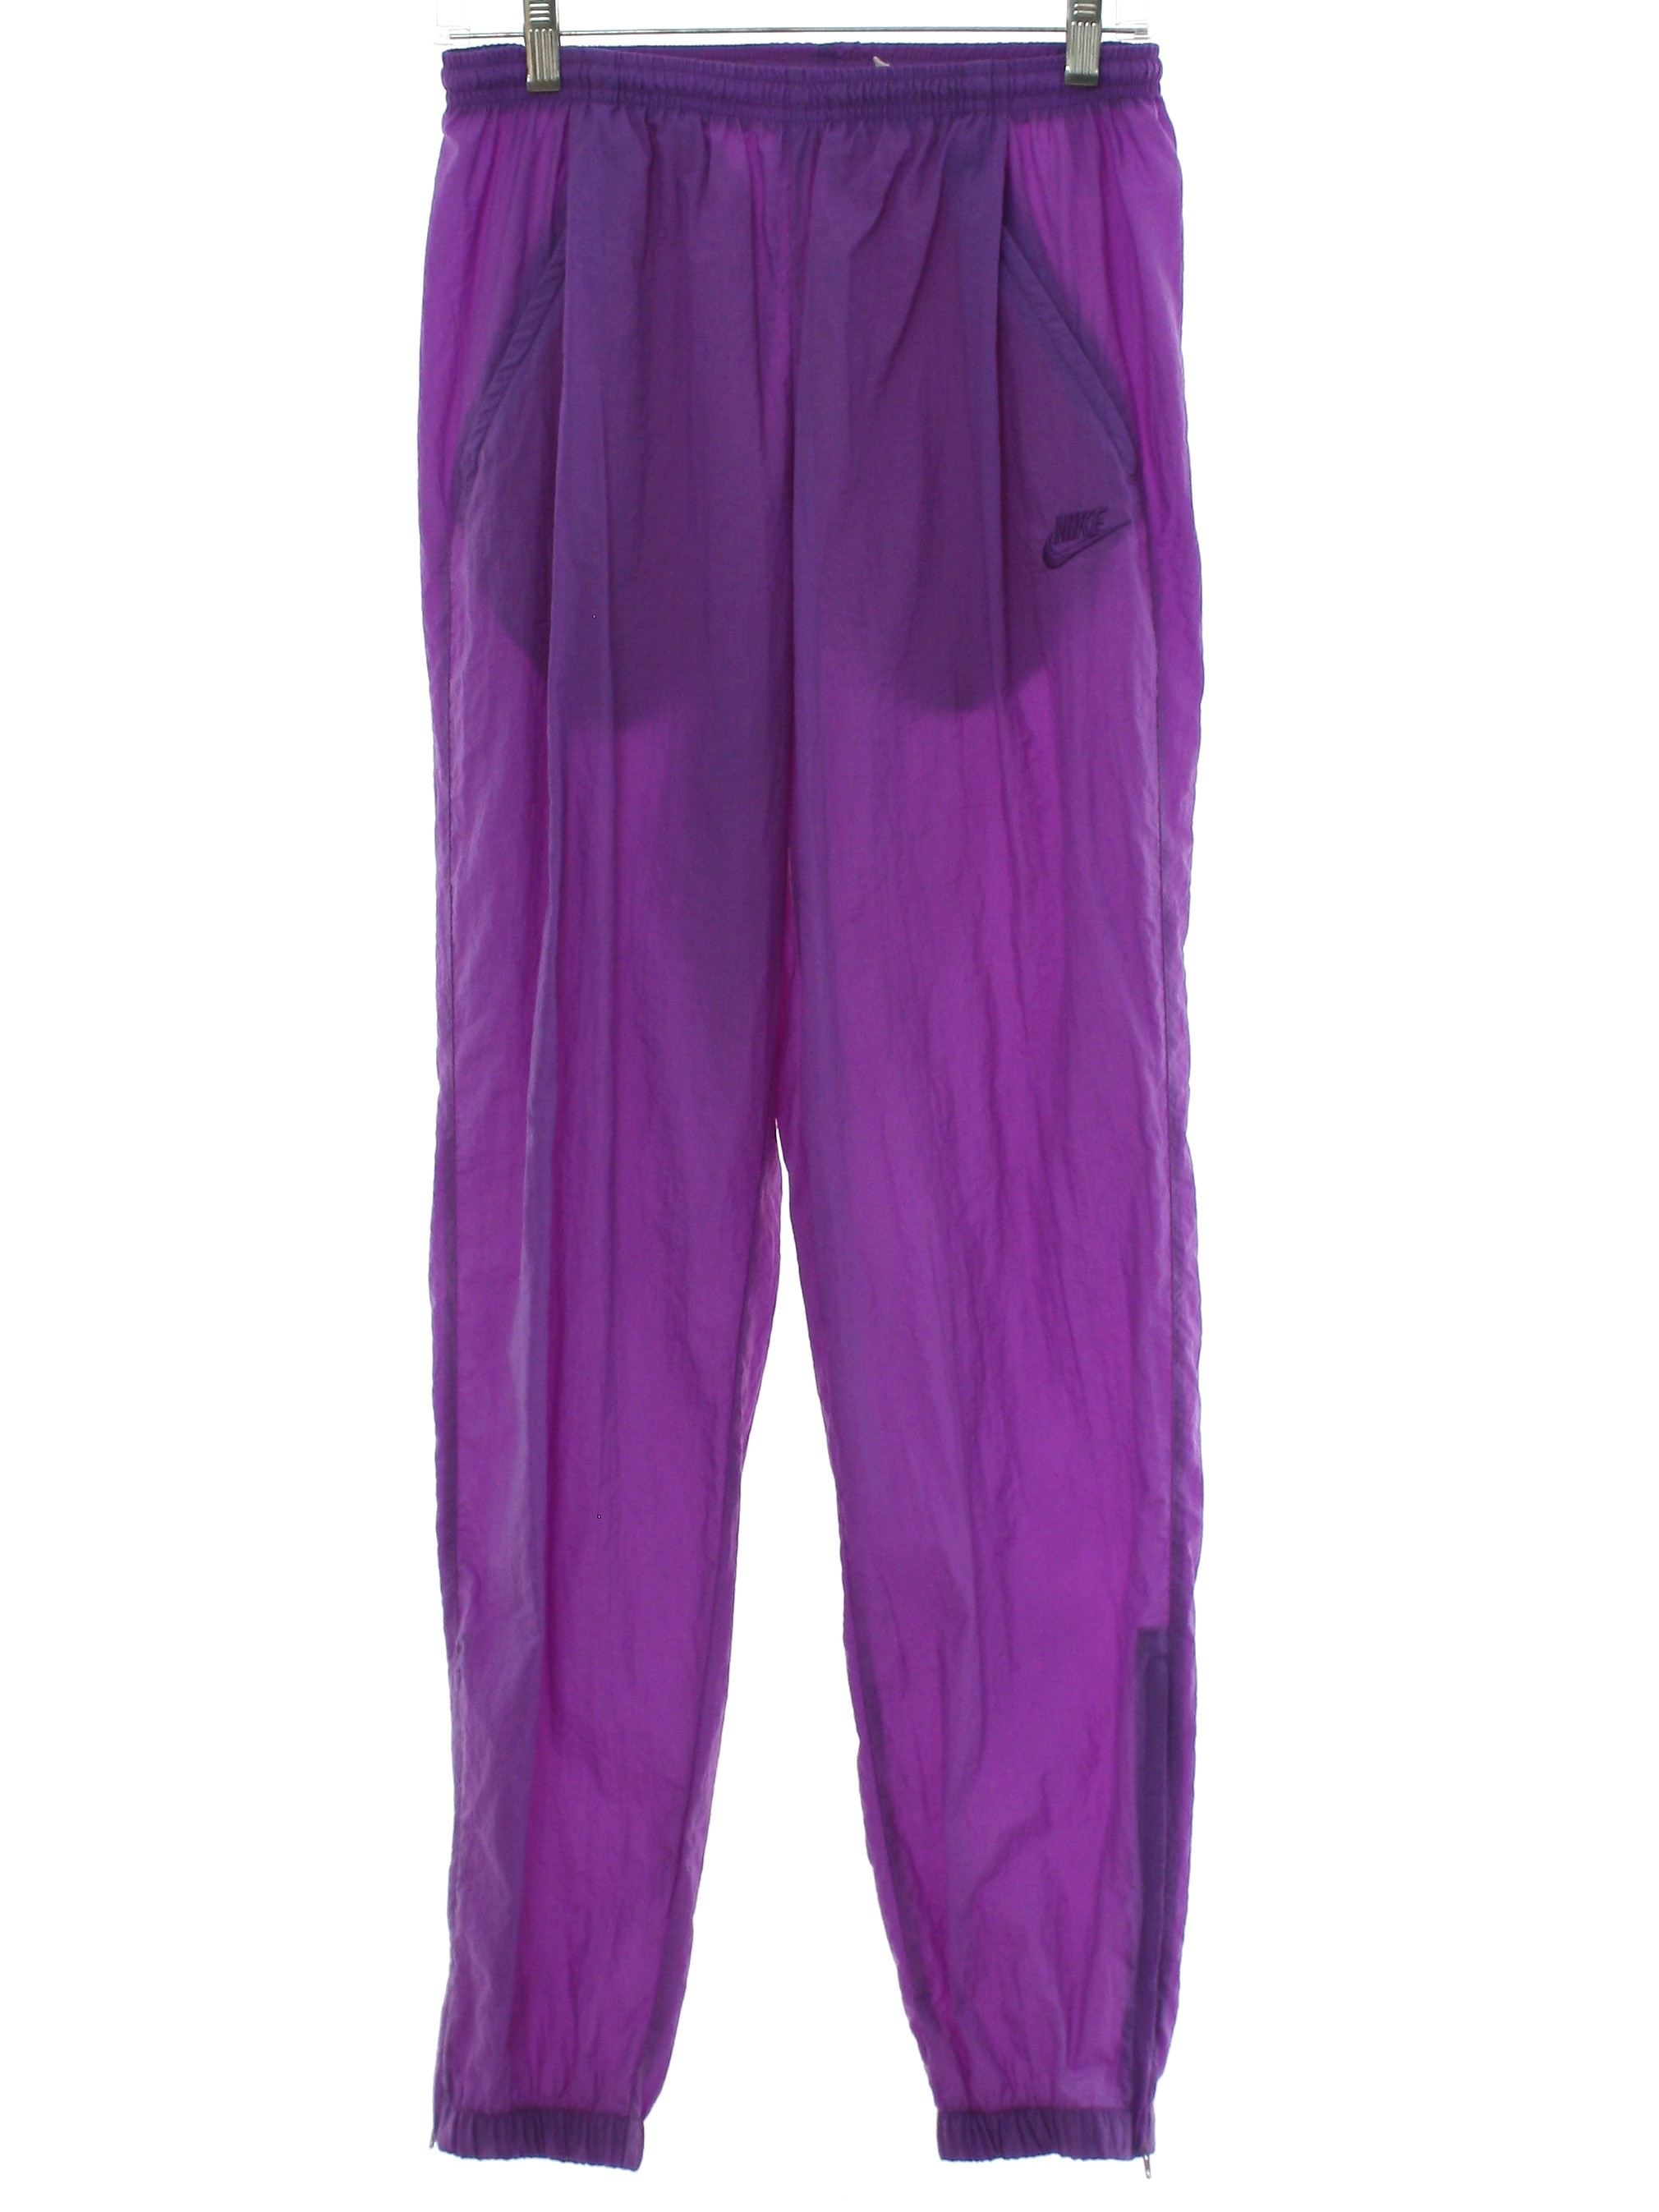 Vintage Nike 80's Pants: 90s -Nike- Womens purple nylon track pants.  Elastic pull on waistband with inside front drawstring ties, angled front  zip pockets, zippered elastic leg cuffs. Nike logo on the